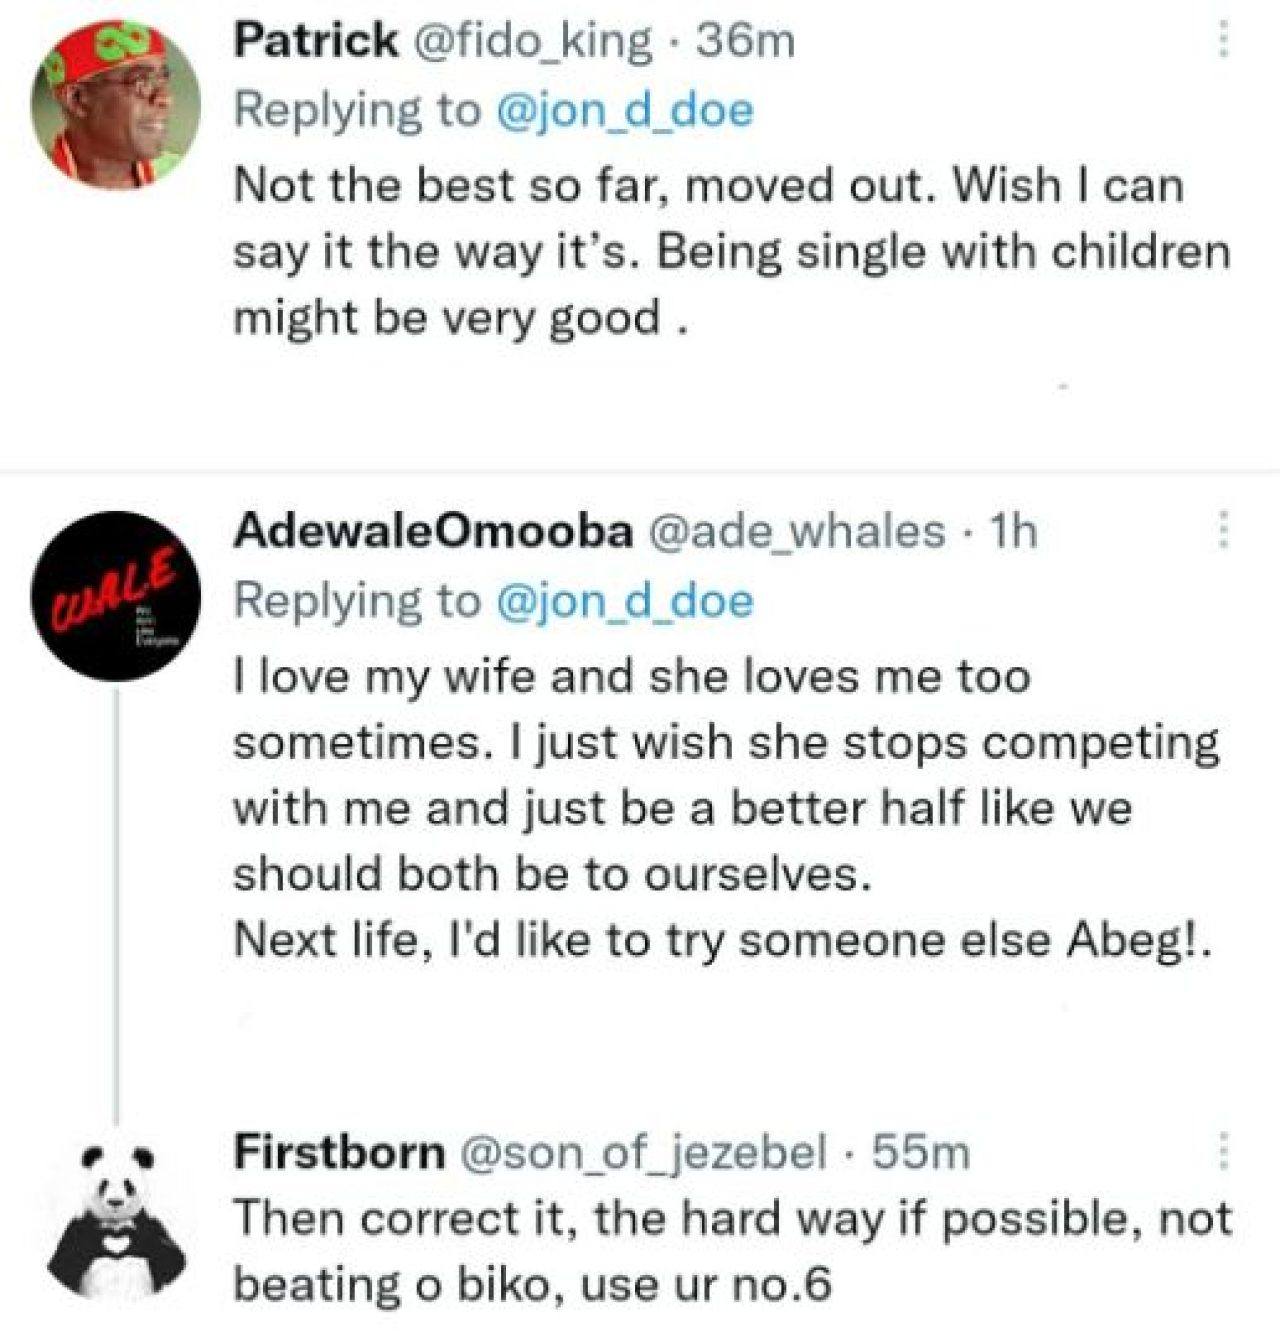 ''If you come back to this world, will you love to be married again and to the same partner?'' - Nigerians react. Afro News Wire